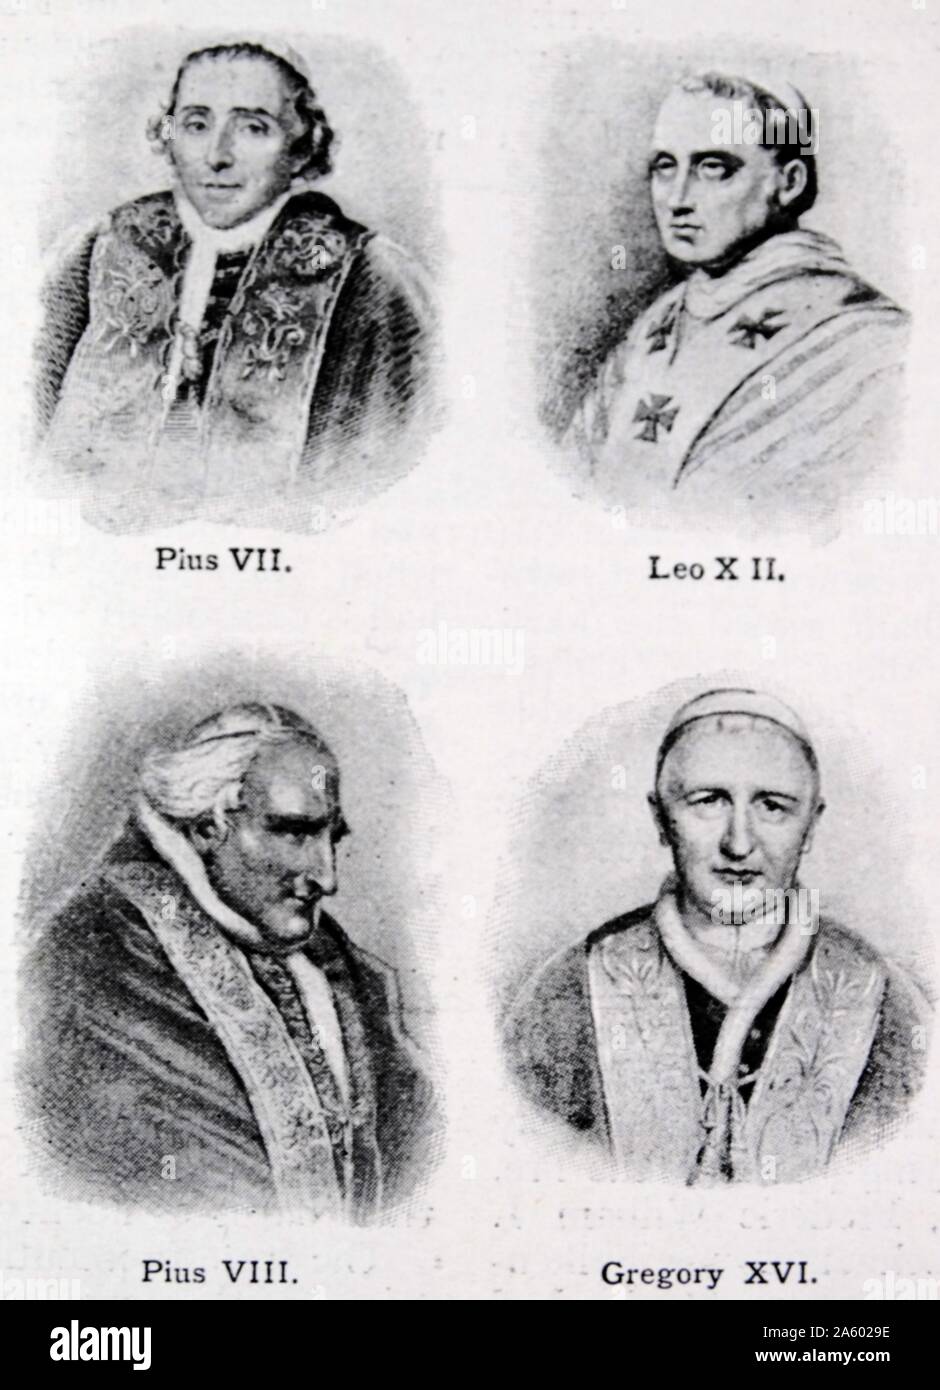 Pius VII, Leo XII, Pius VIII and Gregory XVI - Nineteenth century popes from 1800 to 1846. Stock Photo